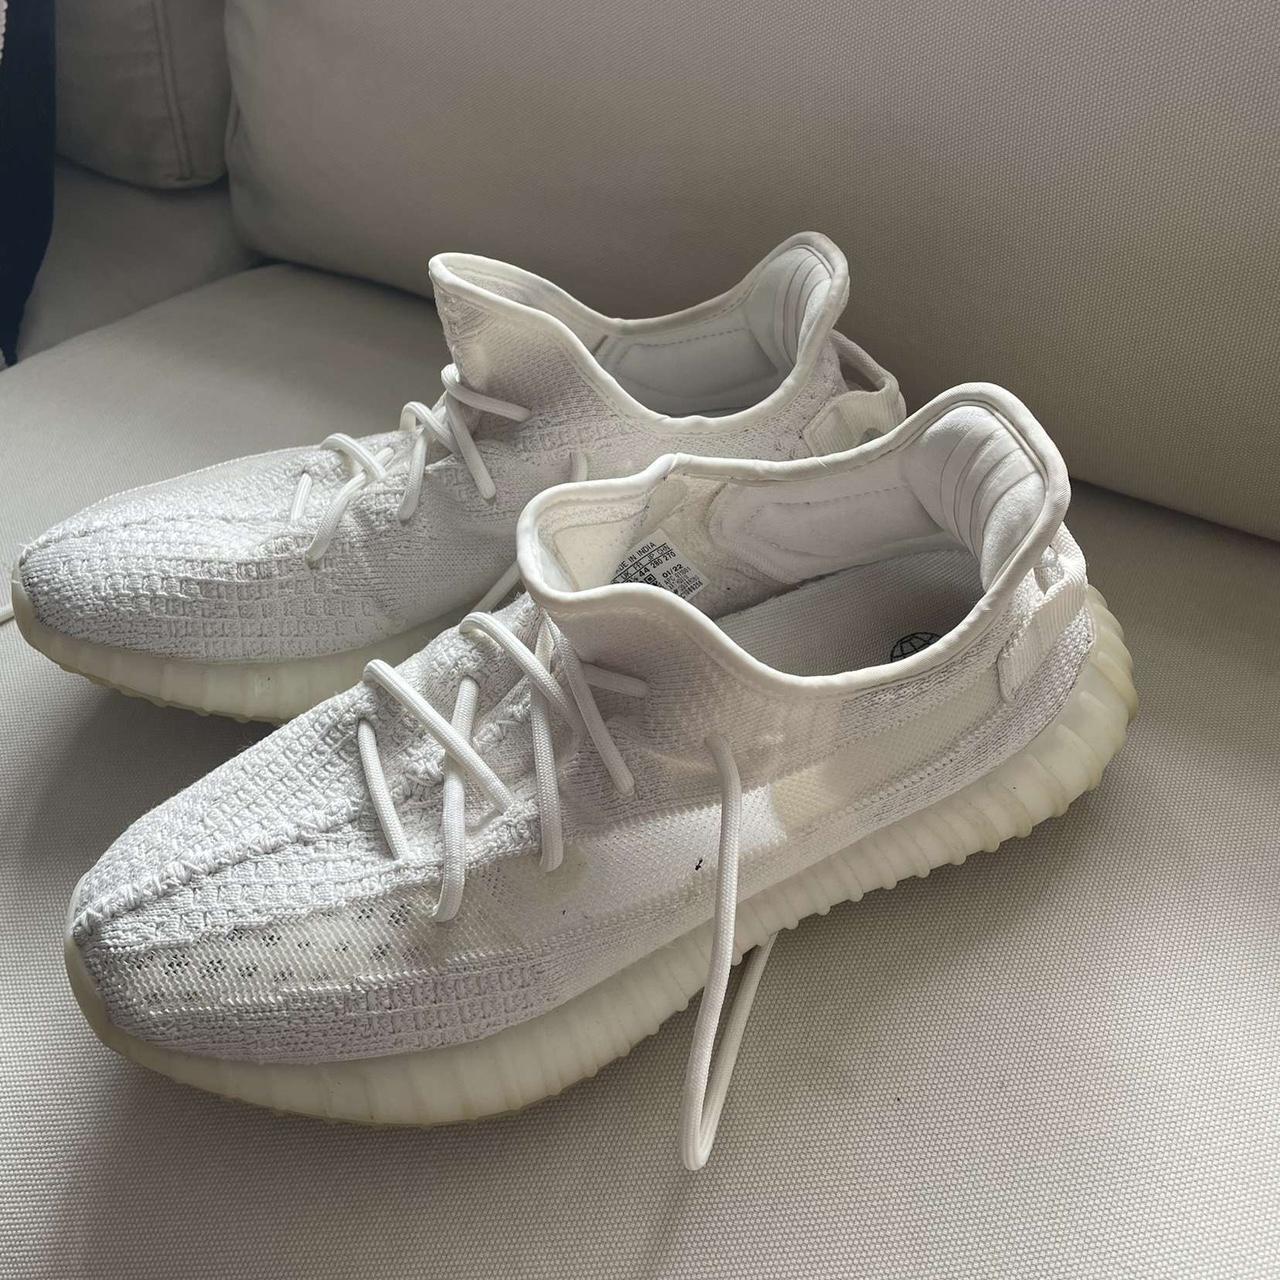 Here for sale are some all white Yeezys good... - Depop